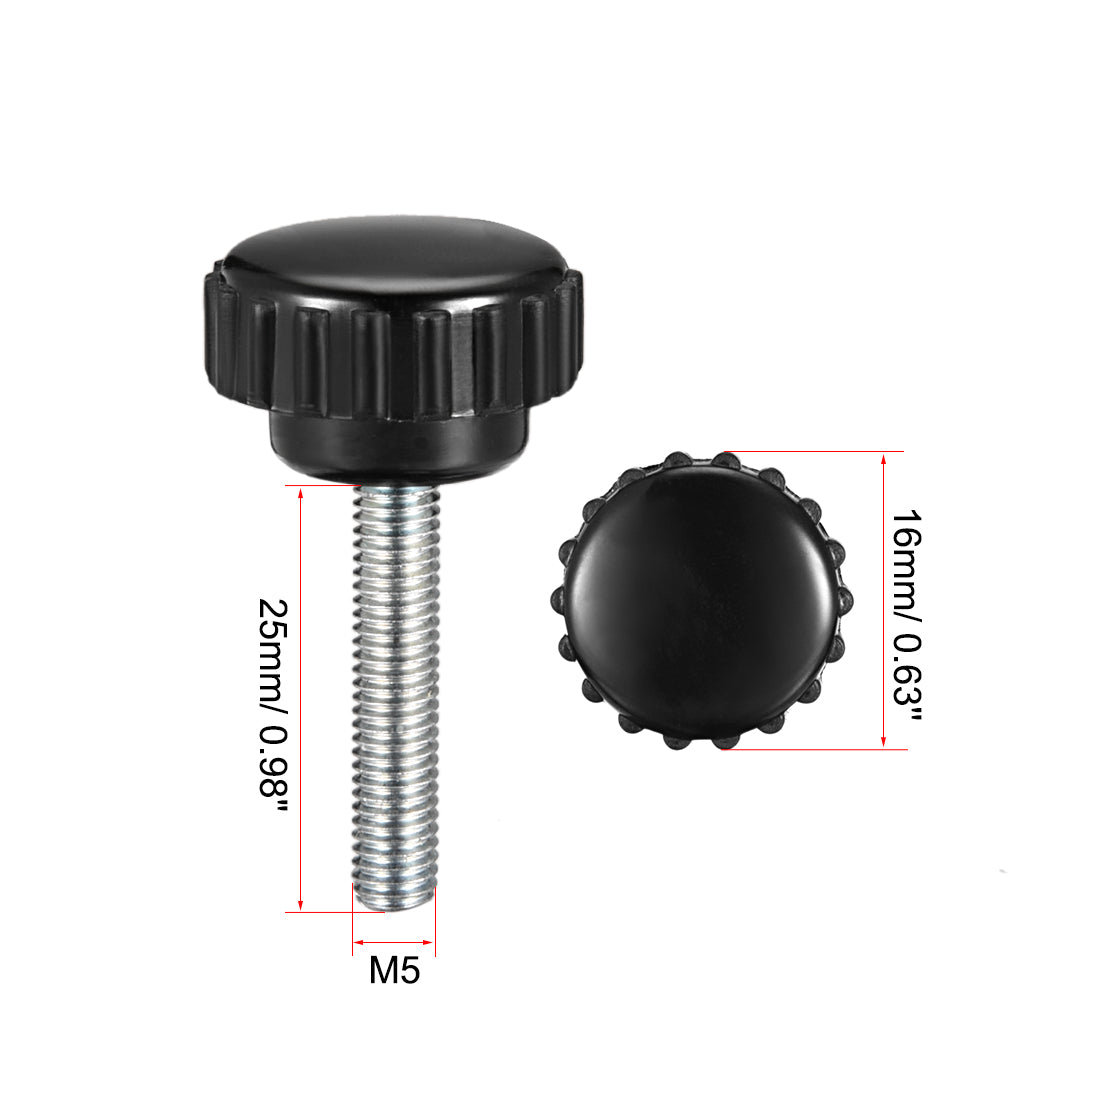 Uxcell Uxcell M6 x 30mm Male Thread Knurled Clamping Knobs Grip Thumb Screw on Type  5 Pcs